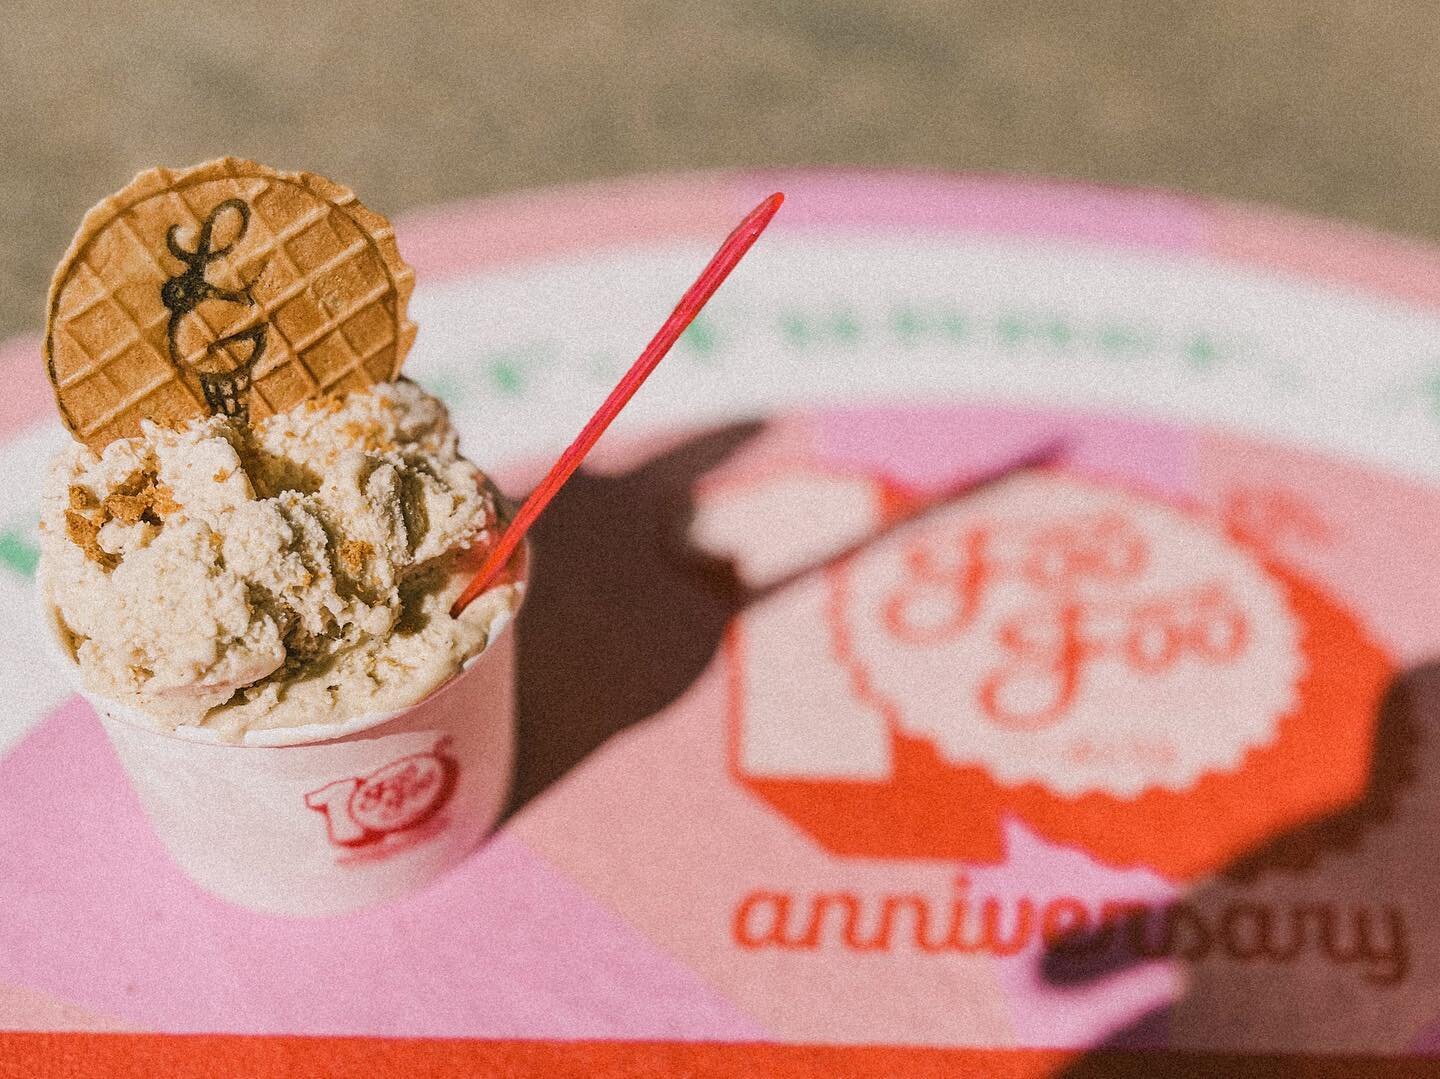 🚨Sunday, November 12th is the last day to try the @foofoofest and Lamonte Gelato collaboration! 🚨

Enjoy FooFoo Gingerbread gelato with a scoop of our espresso gelato and help us celebrate Foo Foo&rsquo;s 10th anniversary ✨

#lamontegelato #foofoof